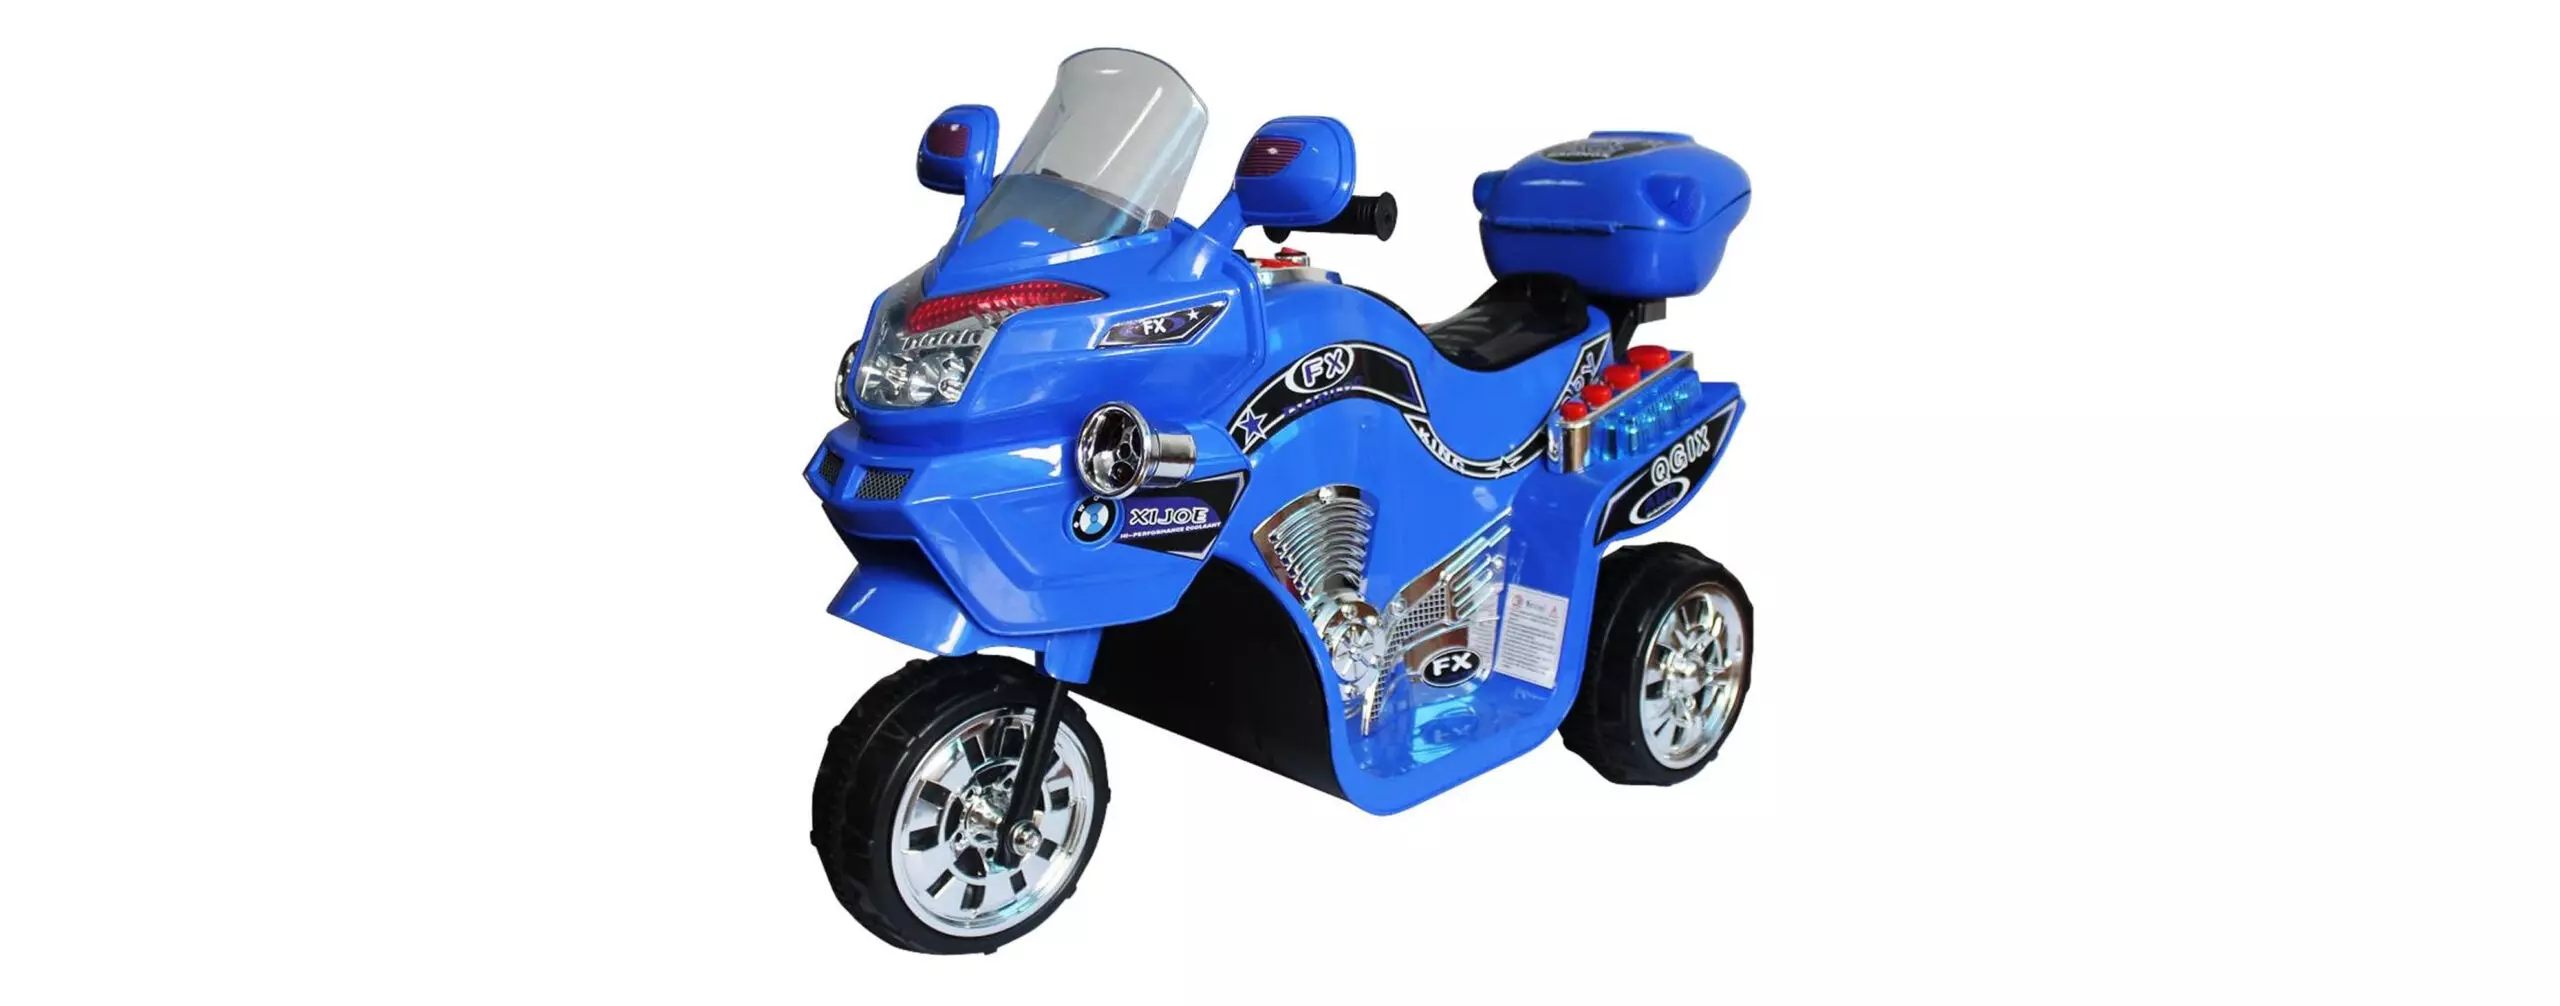 The Best Electric Car For Kids (Review & Buying Guide) in 2022